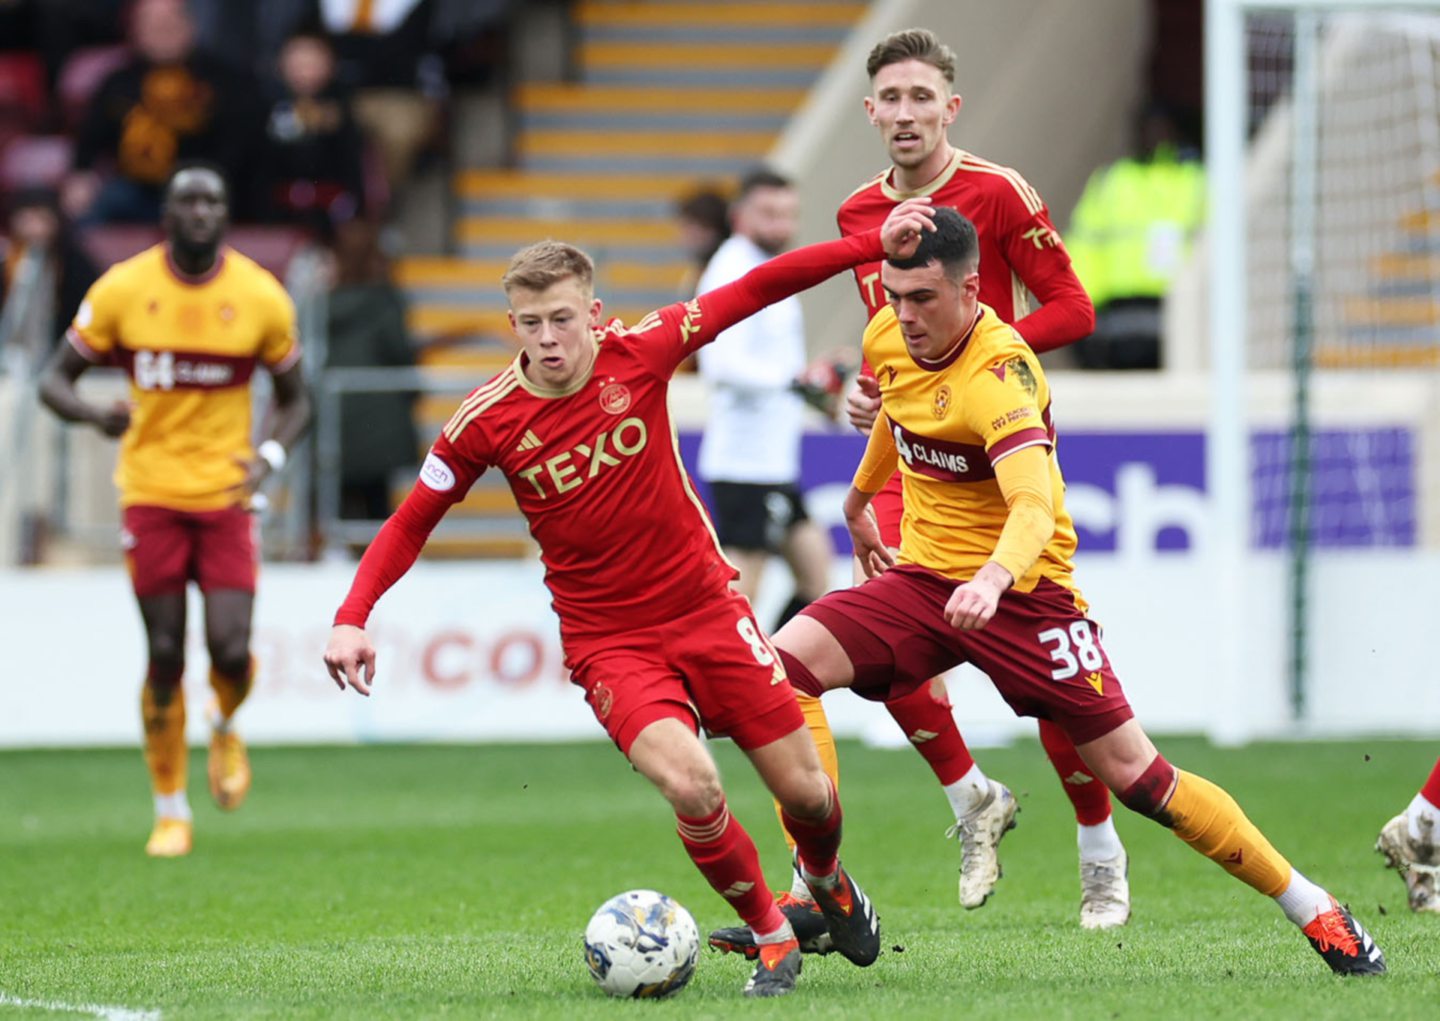 Aberdeen's Connor Barron and Motherwell's Lennon Miller in action. Image: SNS